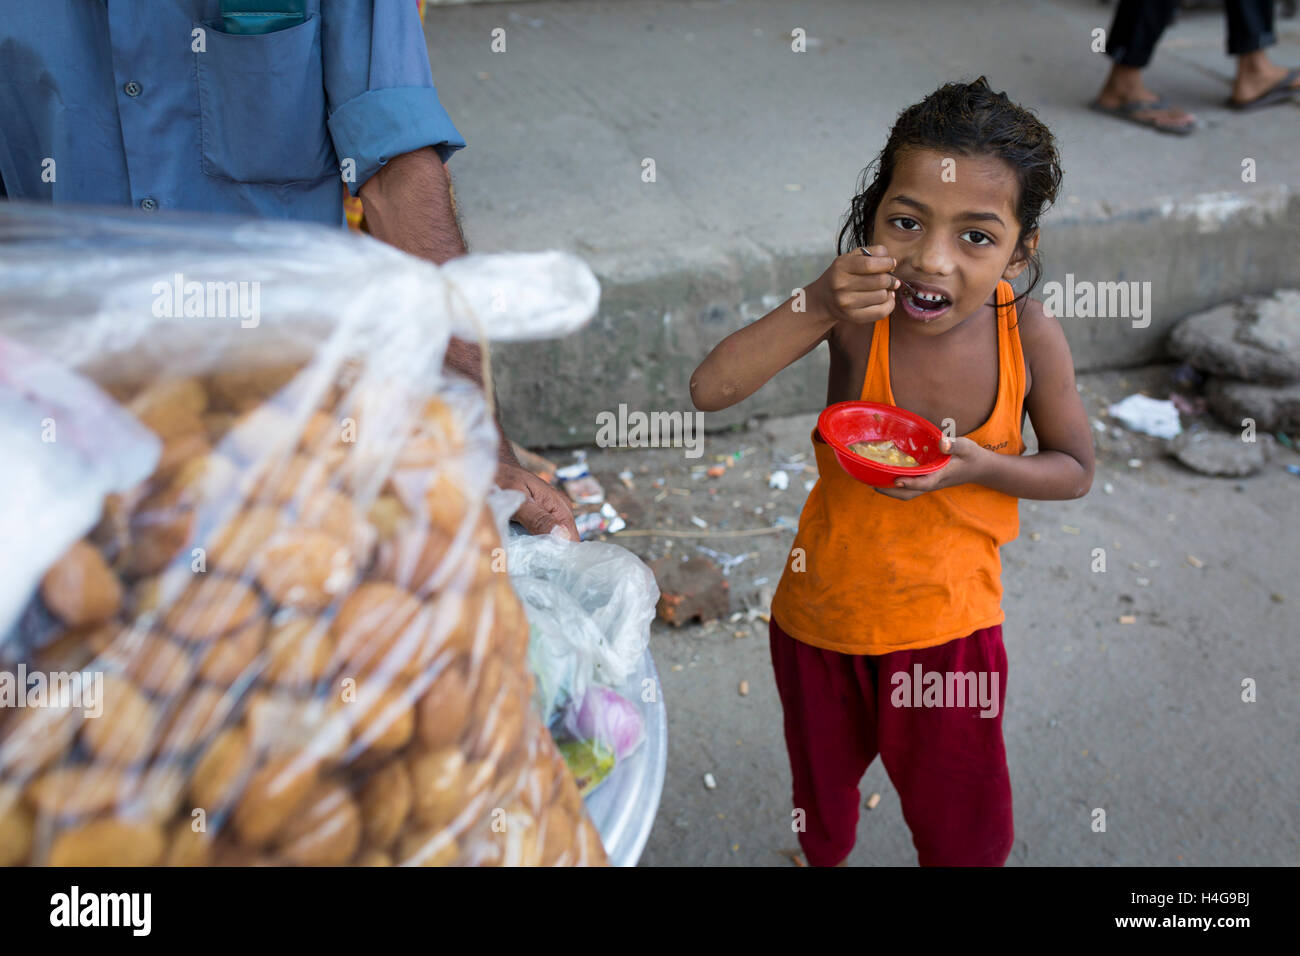 Dhaka, Bangladesh. 15th October, 2016. A child eating street food in Dhaka, Bangladesh, on October 15, 2016. Most of time food are being prepared with unhygienic handling. And those food are being sold in open air in a dirty city, which carry many germs. Unhygienic food items that are being sold on the streets of the capital are exposing the consumers to serious health hazards. Credit:  zakir hossain chowdhury zakir/Alamy Live News Stock Photo